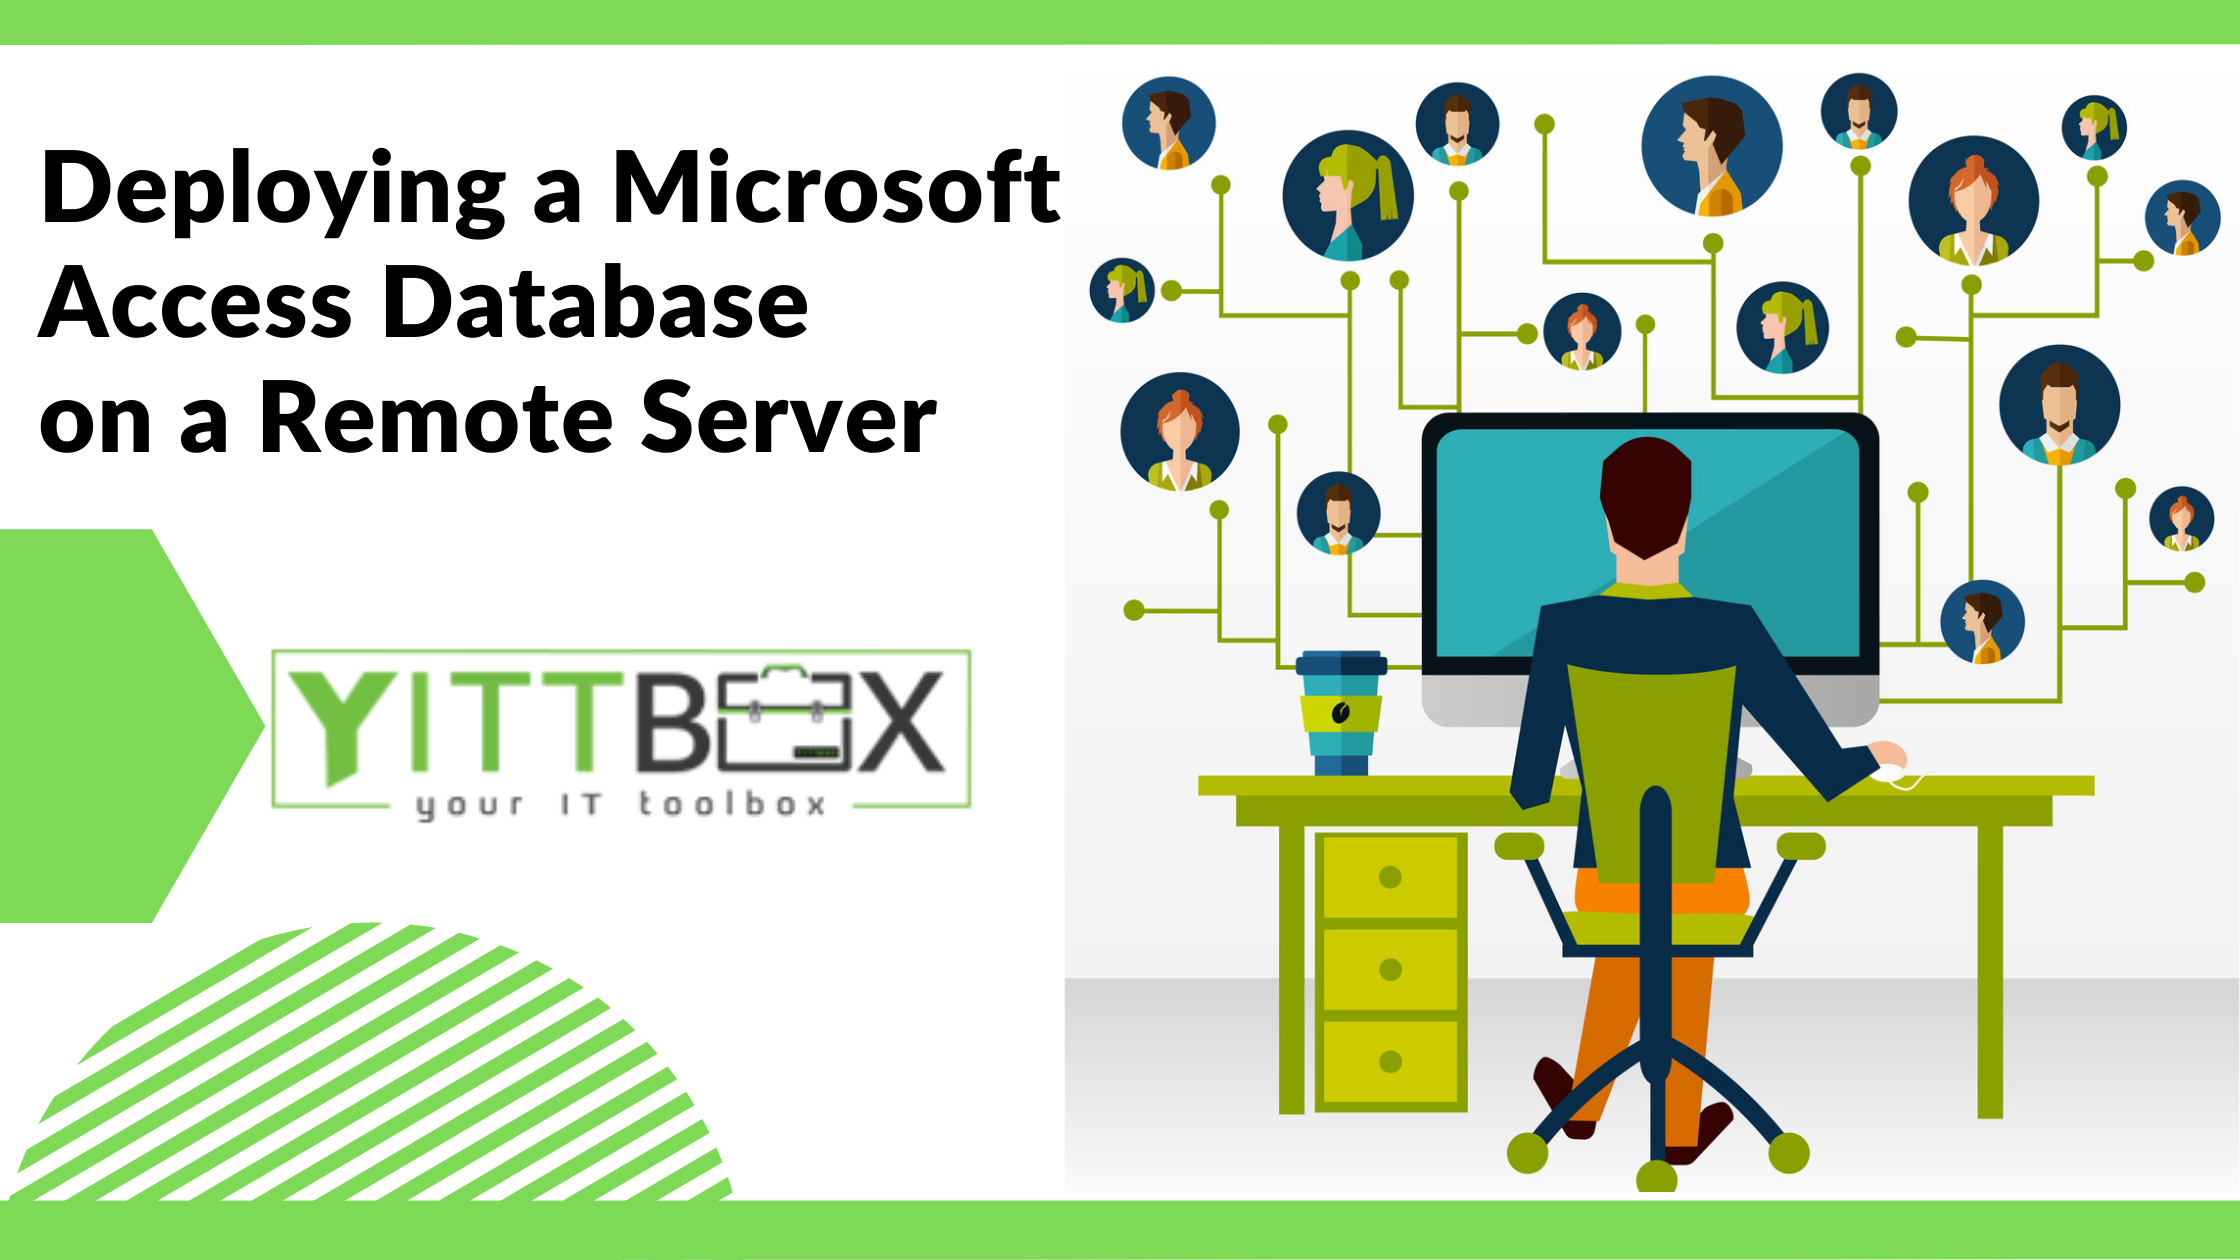 Deploying Microsoft Access Database on a Remote Server